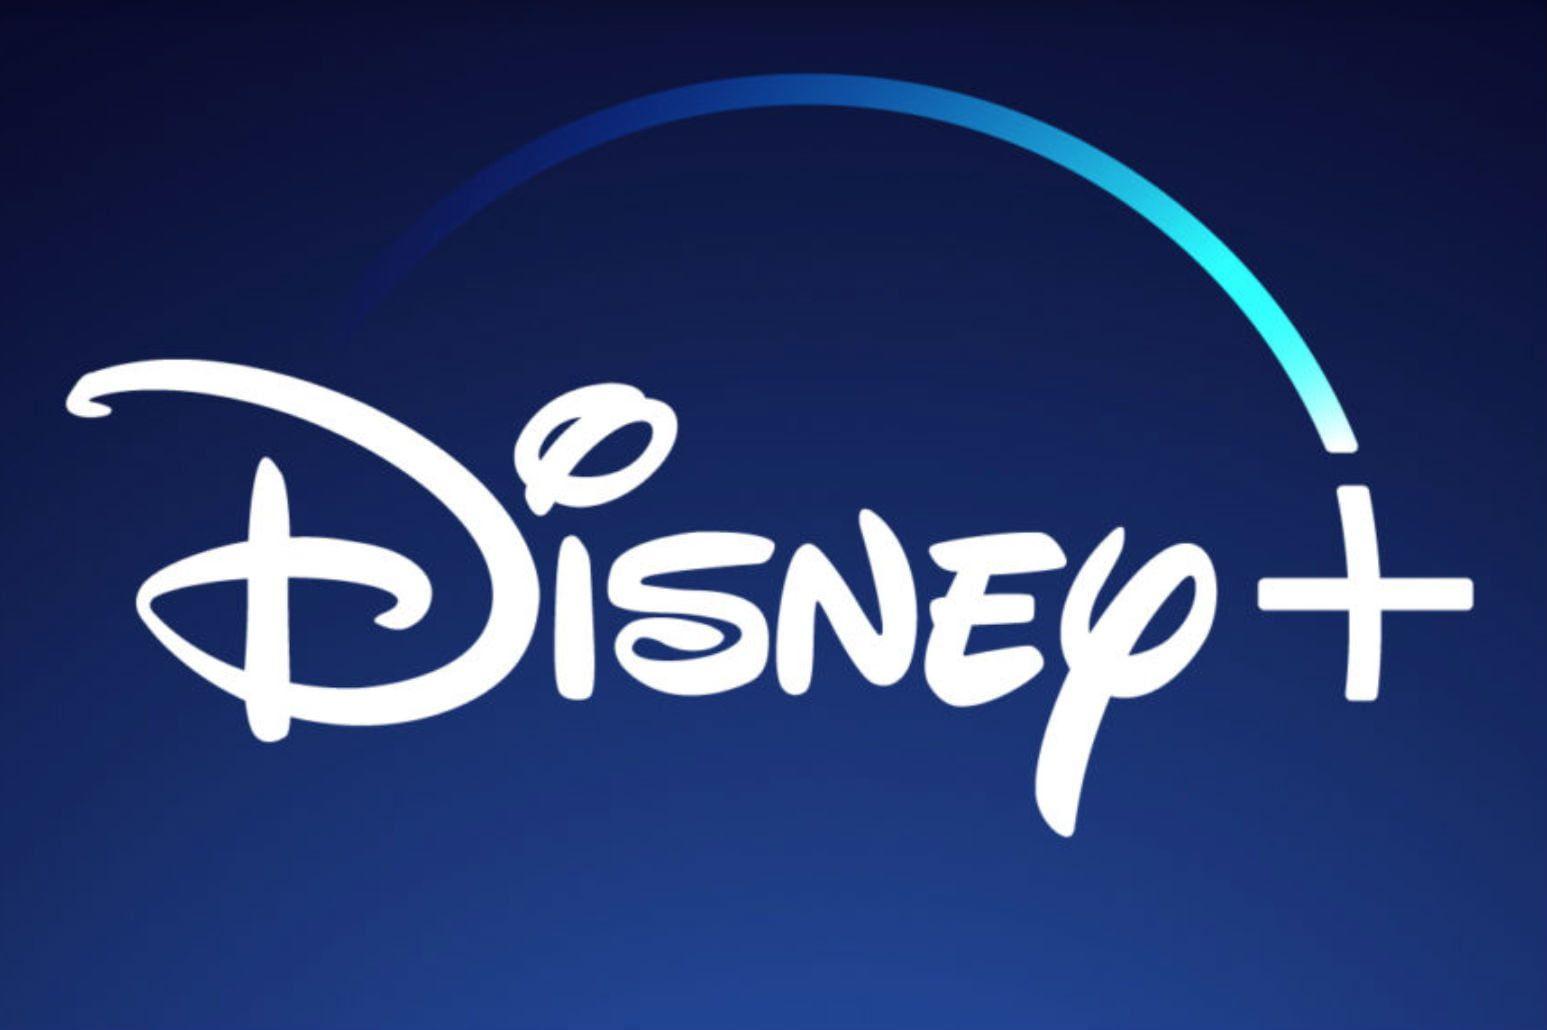 Dsiney Logo - Disney Plus: Everything We Know About Disney's Streaming Service ...